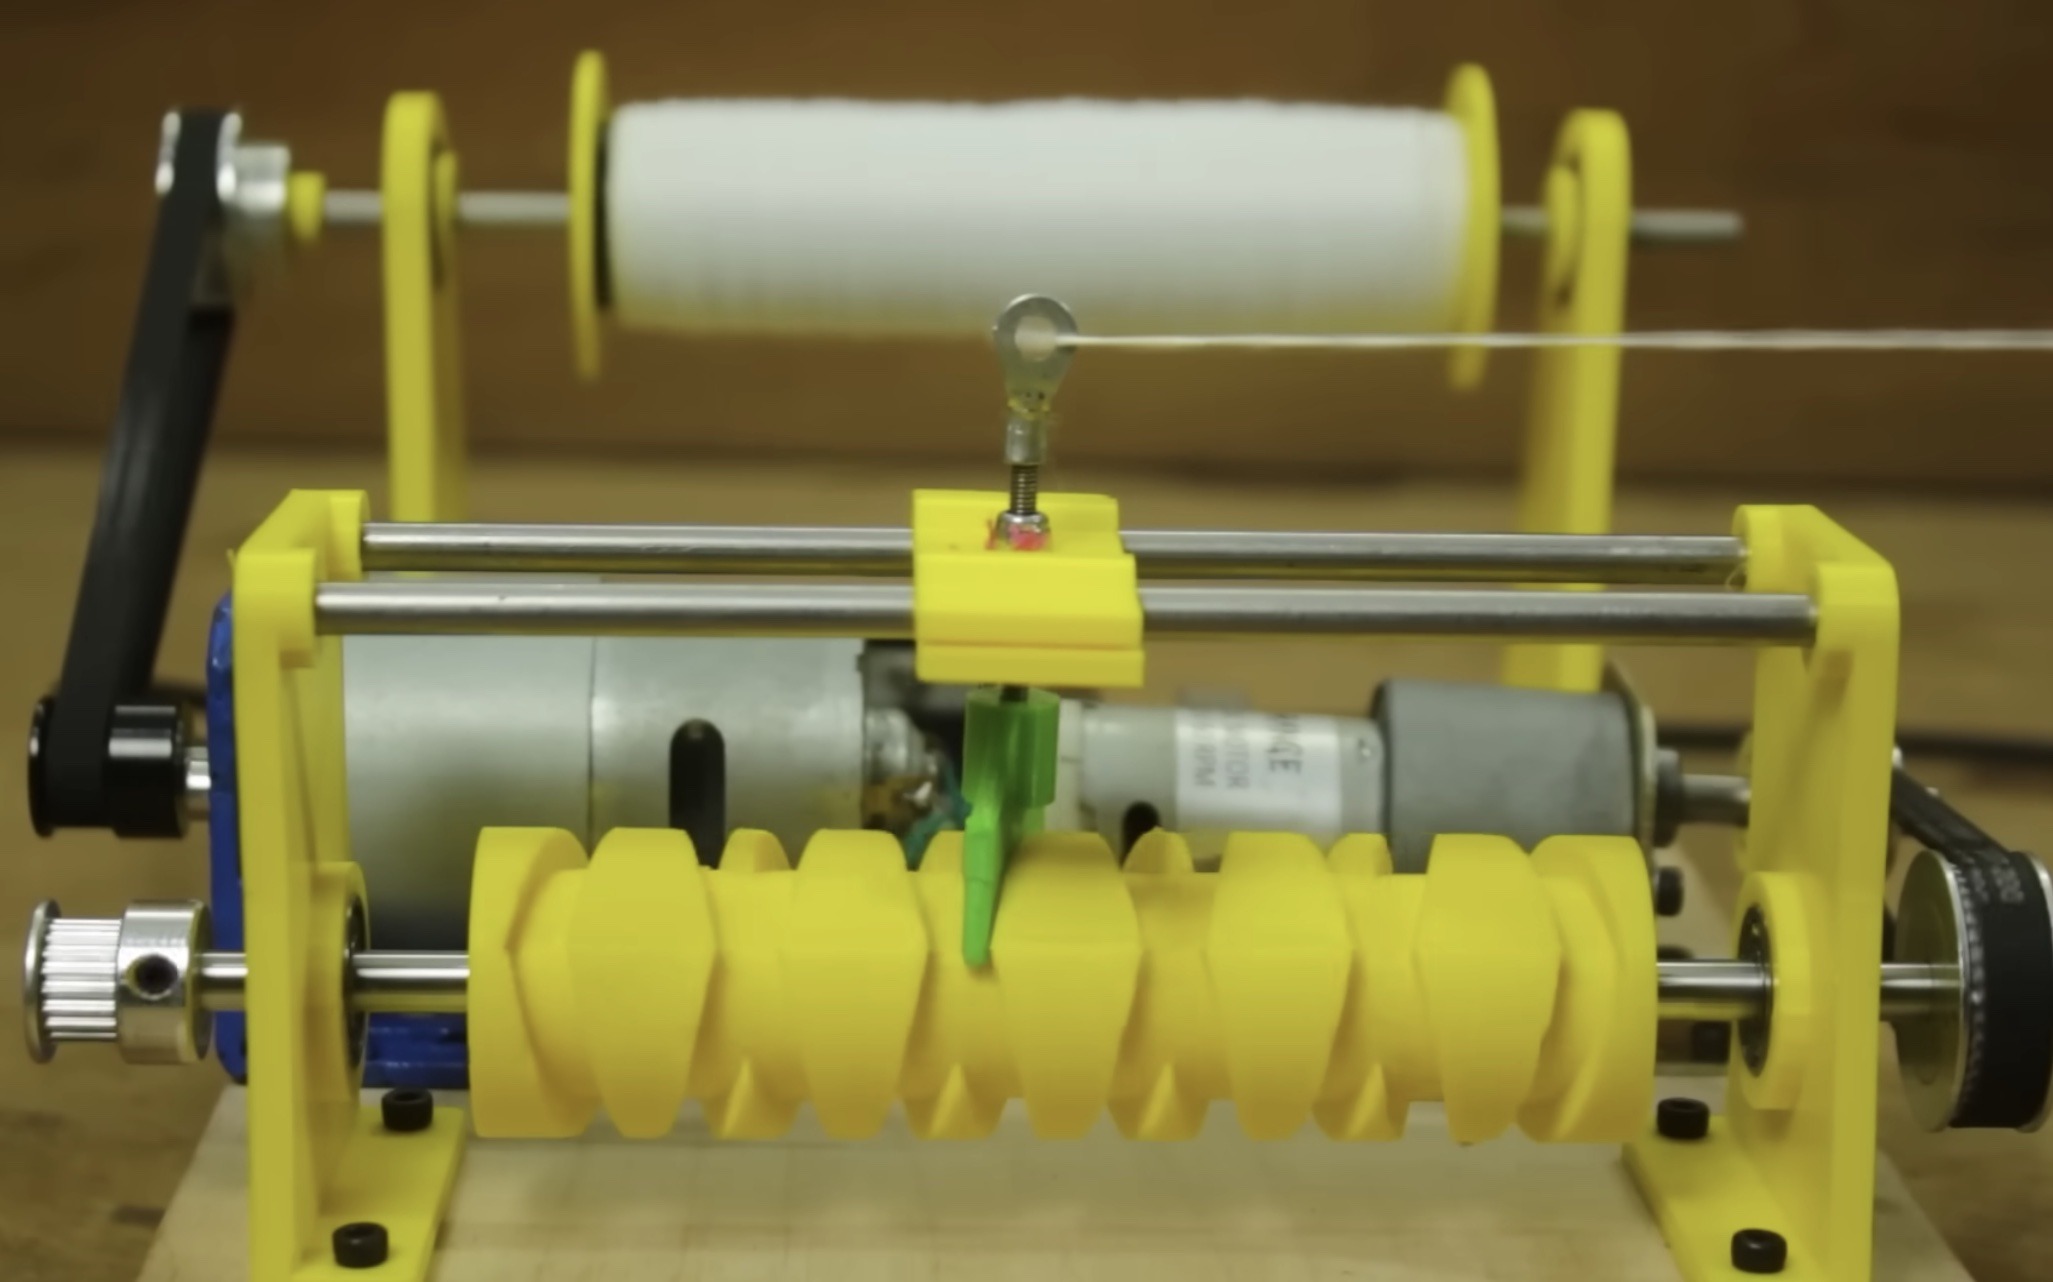 The automated winder has an automatic reversing screw